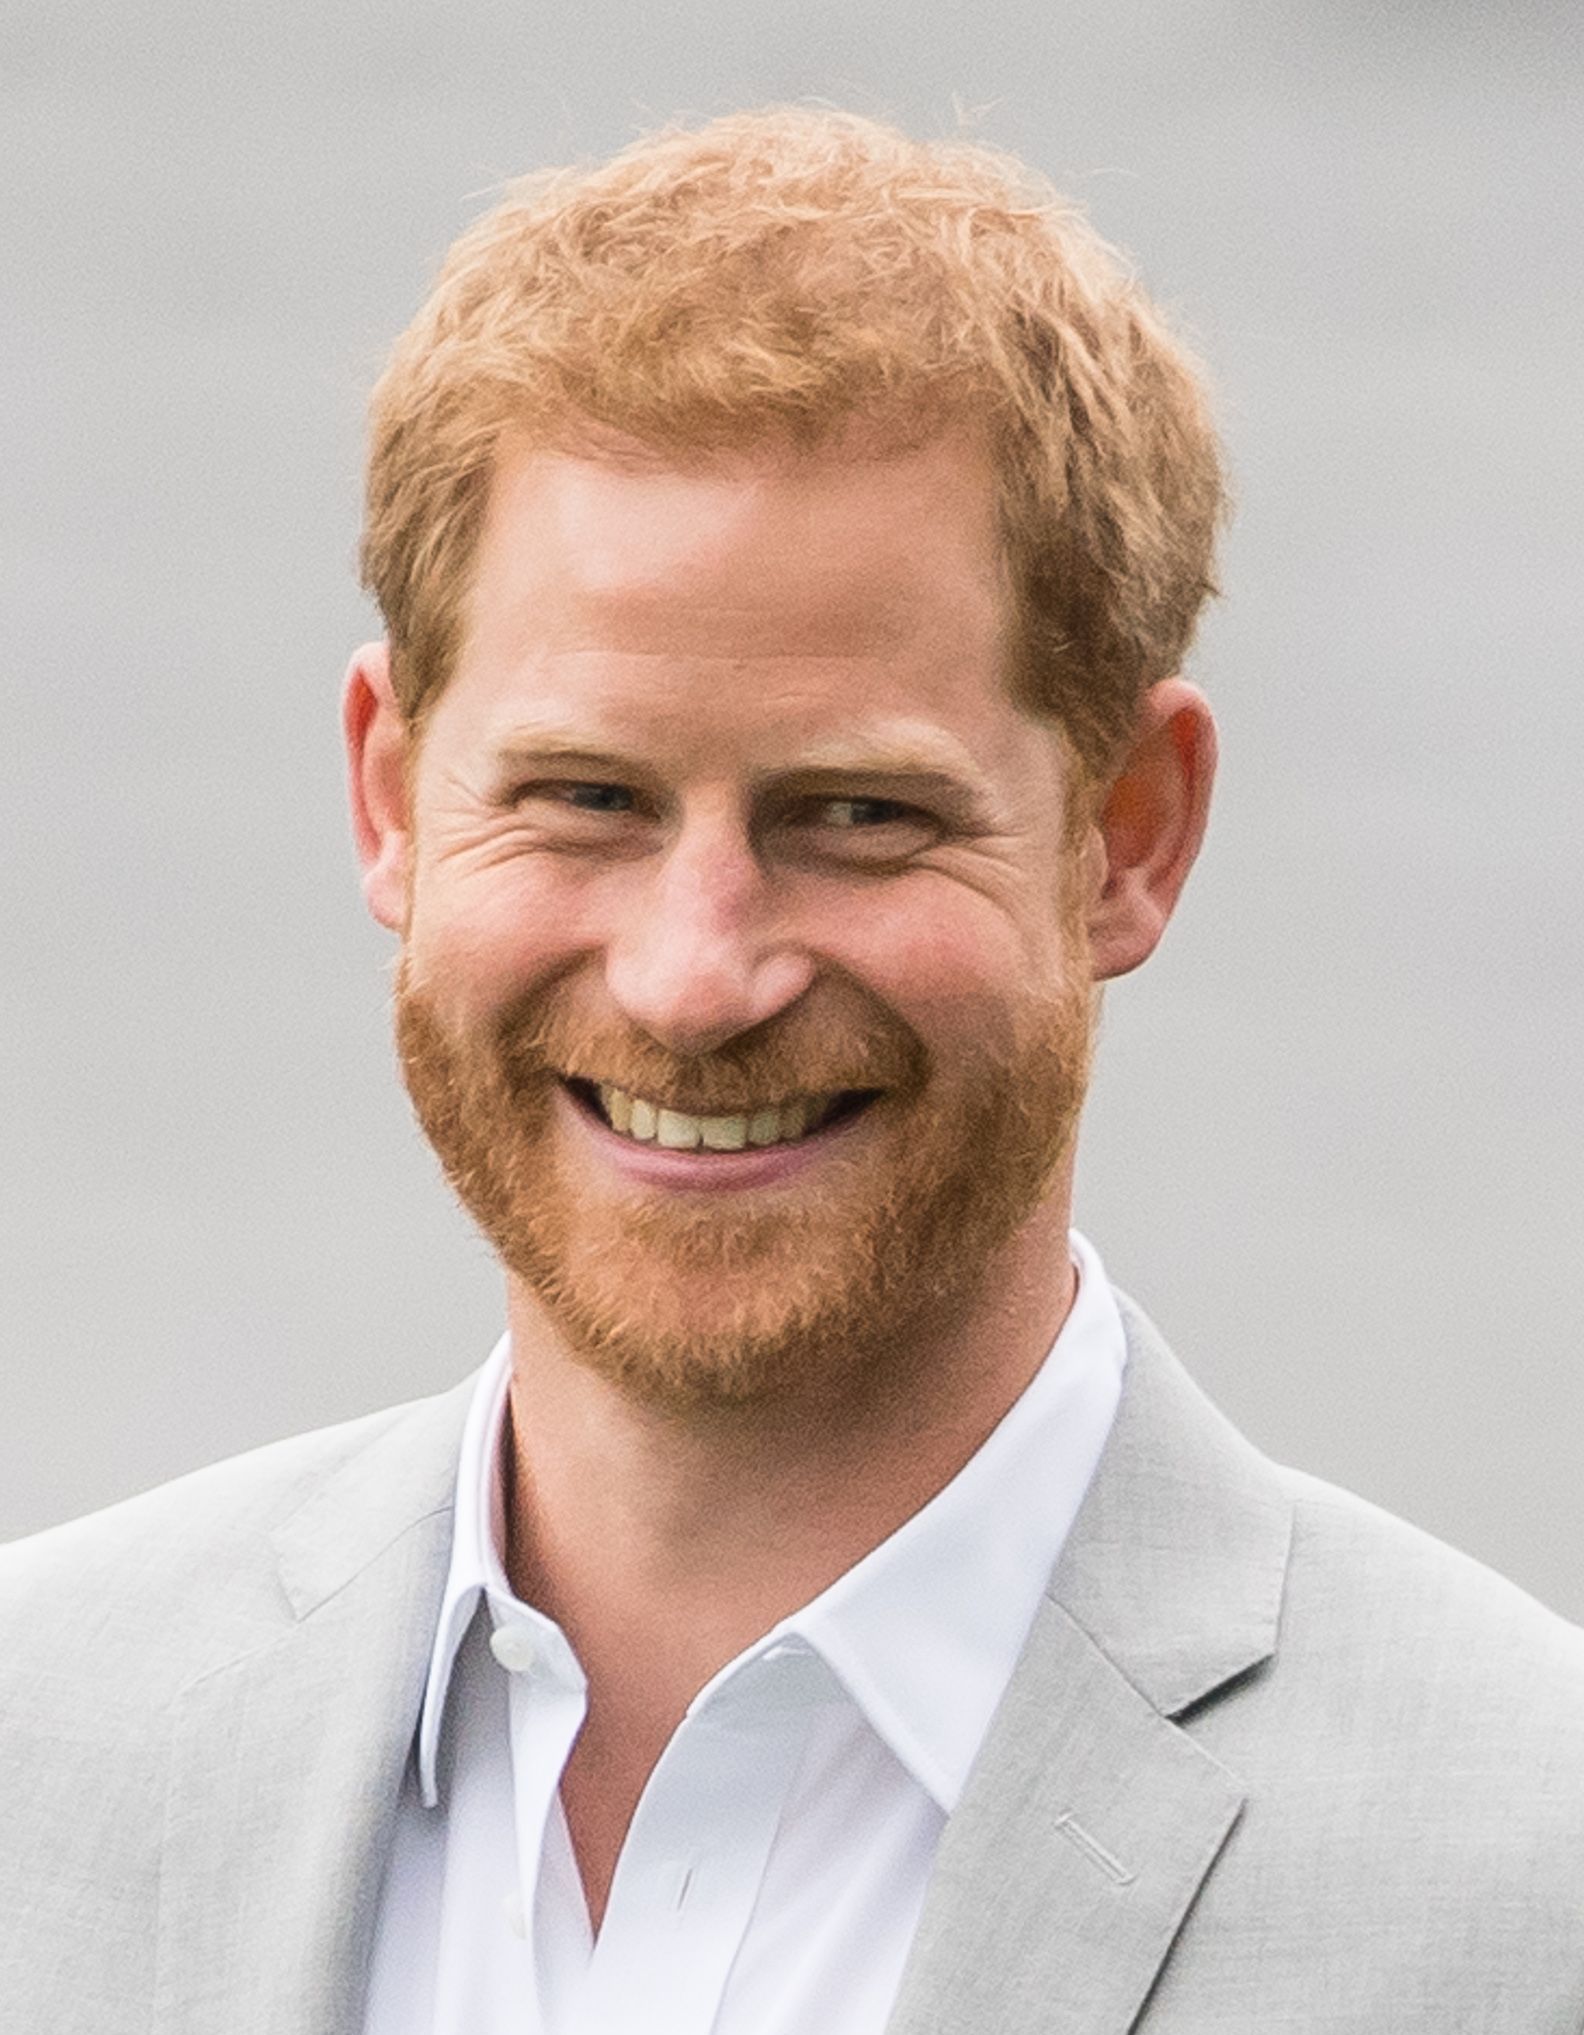 Prince Harry, Duke of Sussex, legal battle, UK, British newspapers, High Court trial, Mirror Group Newspapers (MGN), phone hacking, royal family, coronation, testimony, strained relationship, Frogmore Cottage, California, Meghan Markle, financial independence.